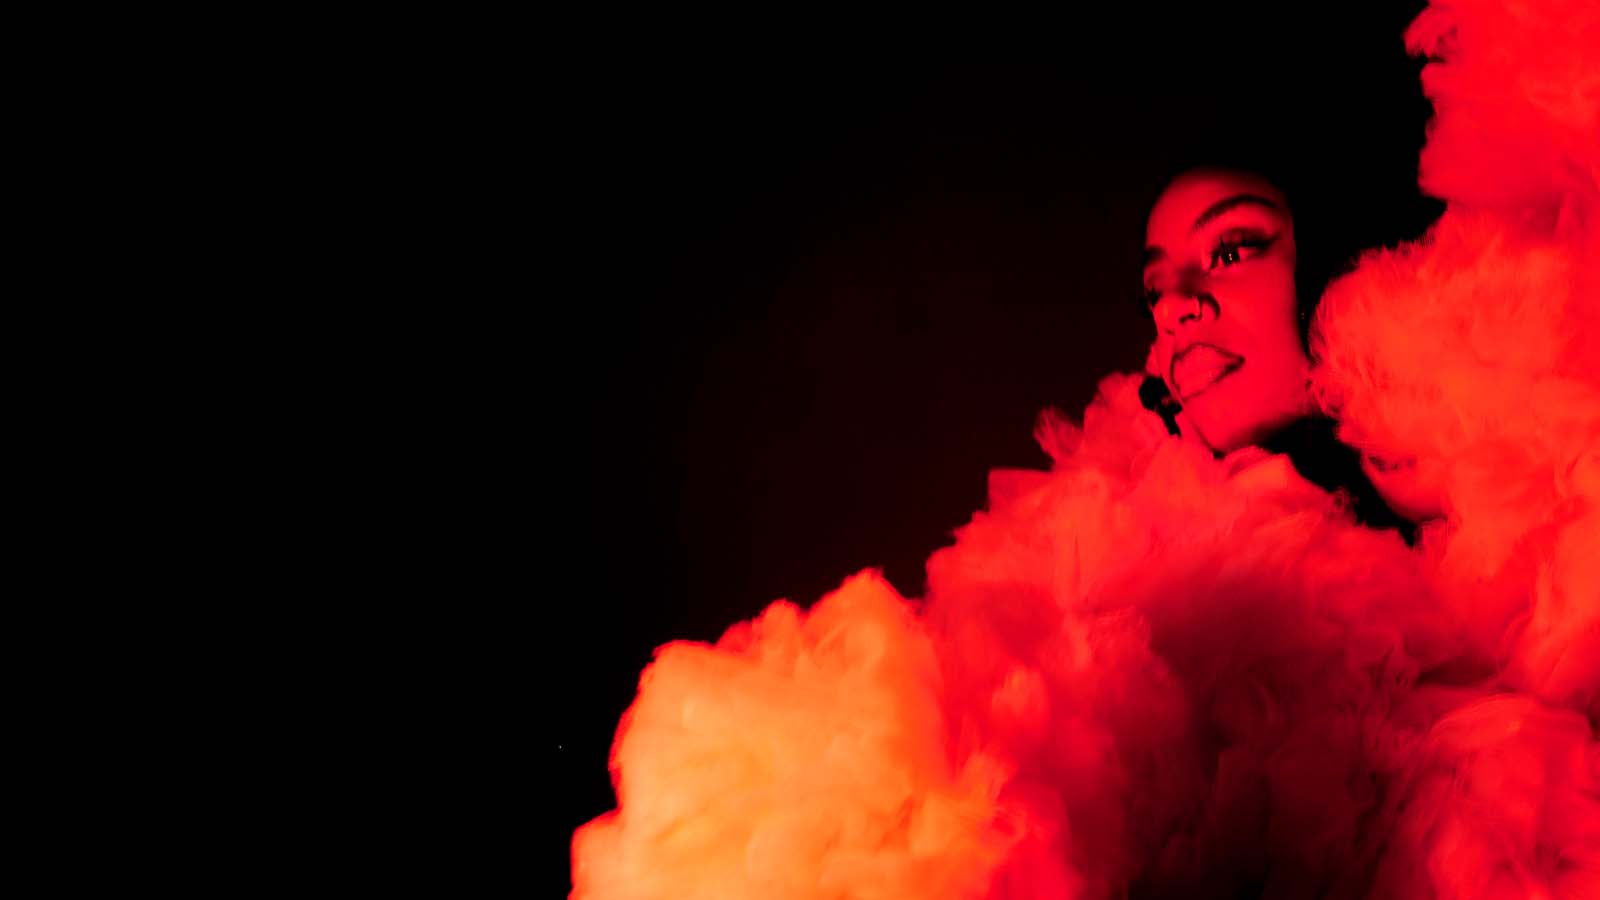 A woman (Male Broomes) surrounded by clouds of what appears to be smoke or cloth, lit in dramatic red and white lighting